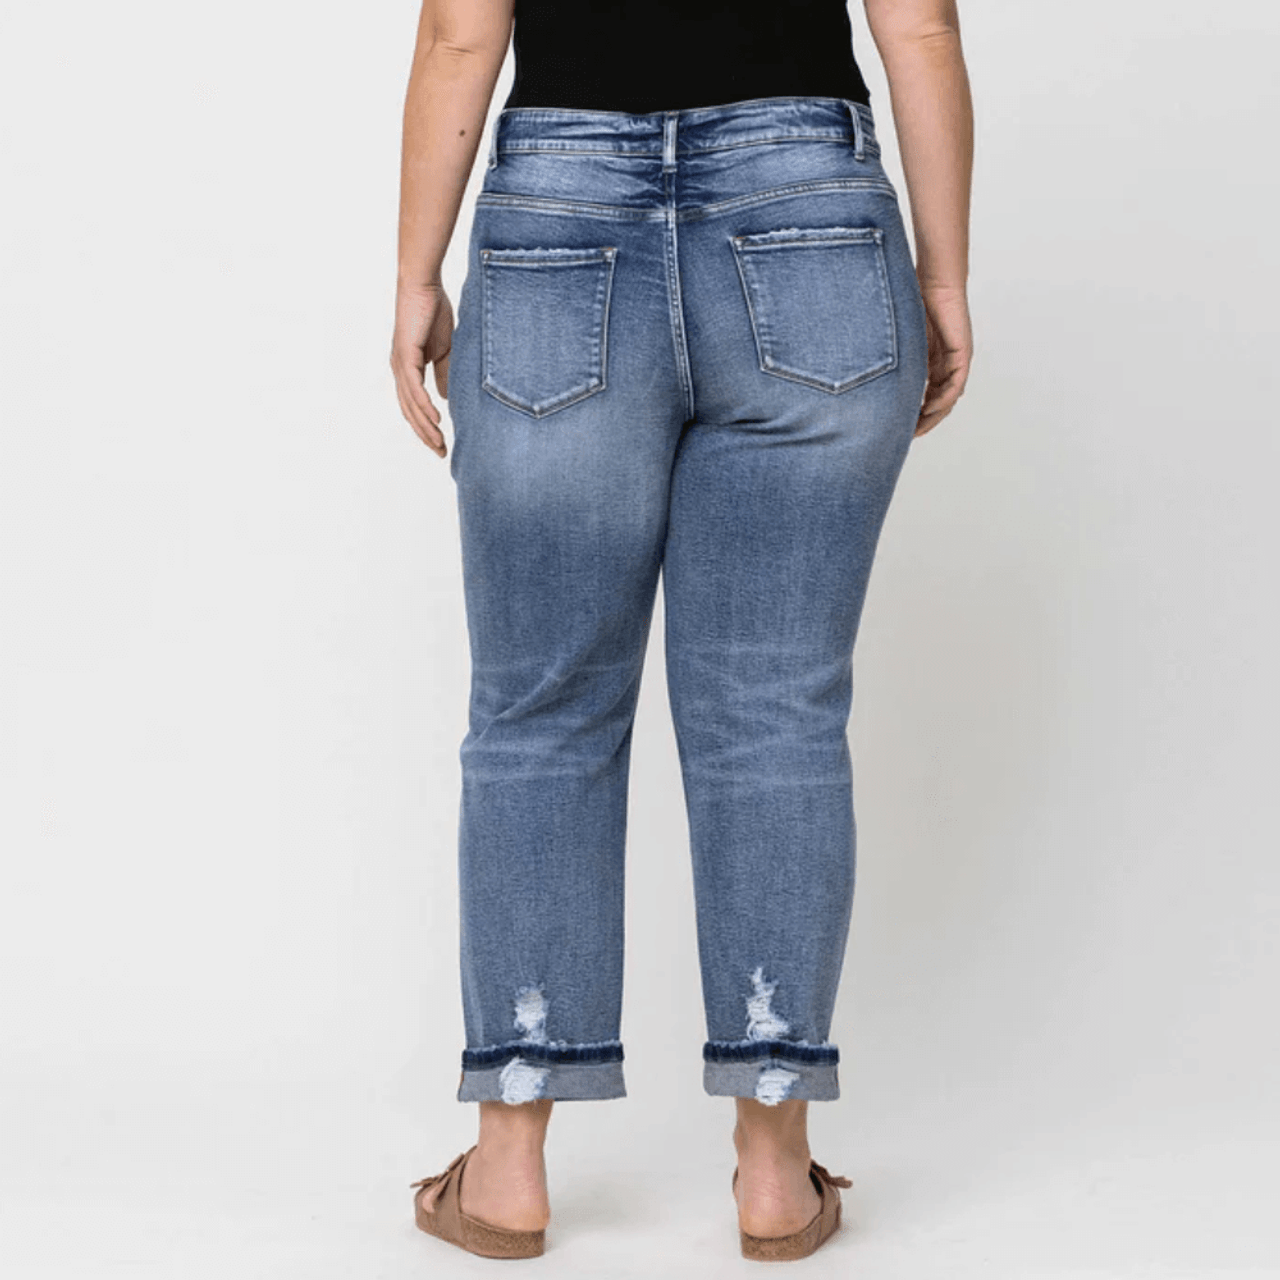 Vervet Daisy Plus Stretch Boyfriend Jeans with Cuff and Exposed Button Fly